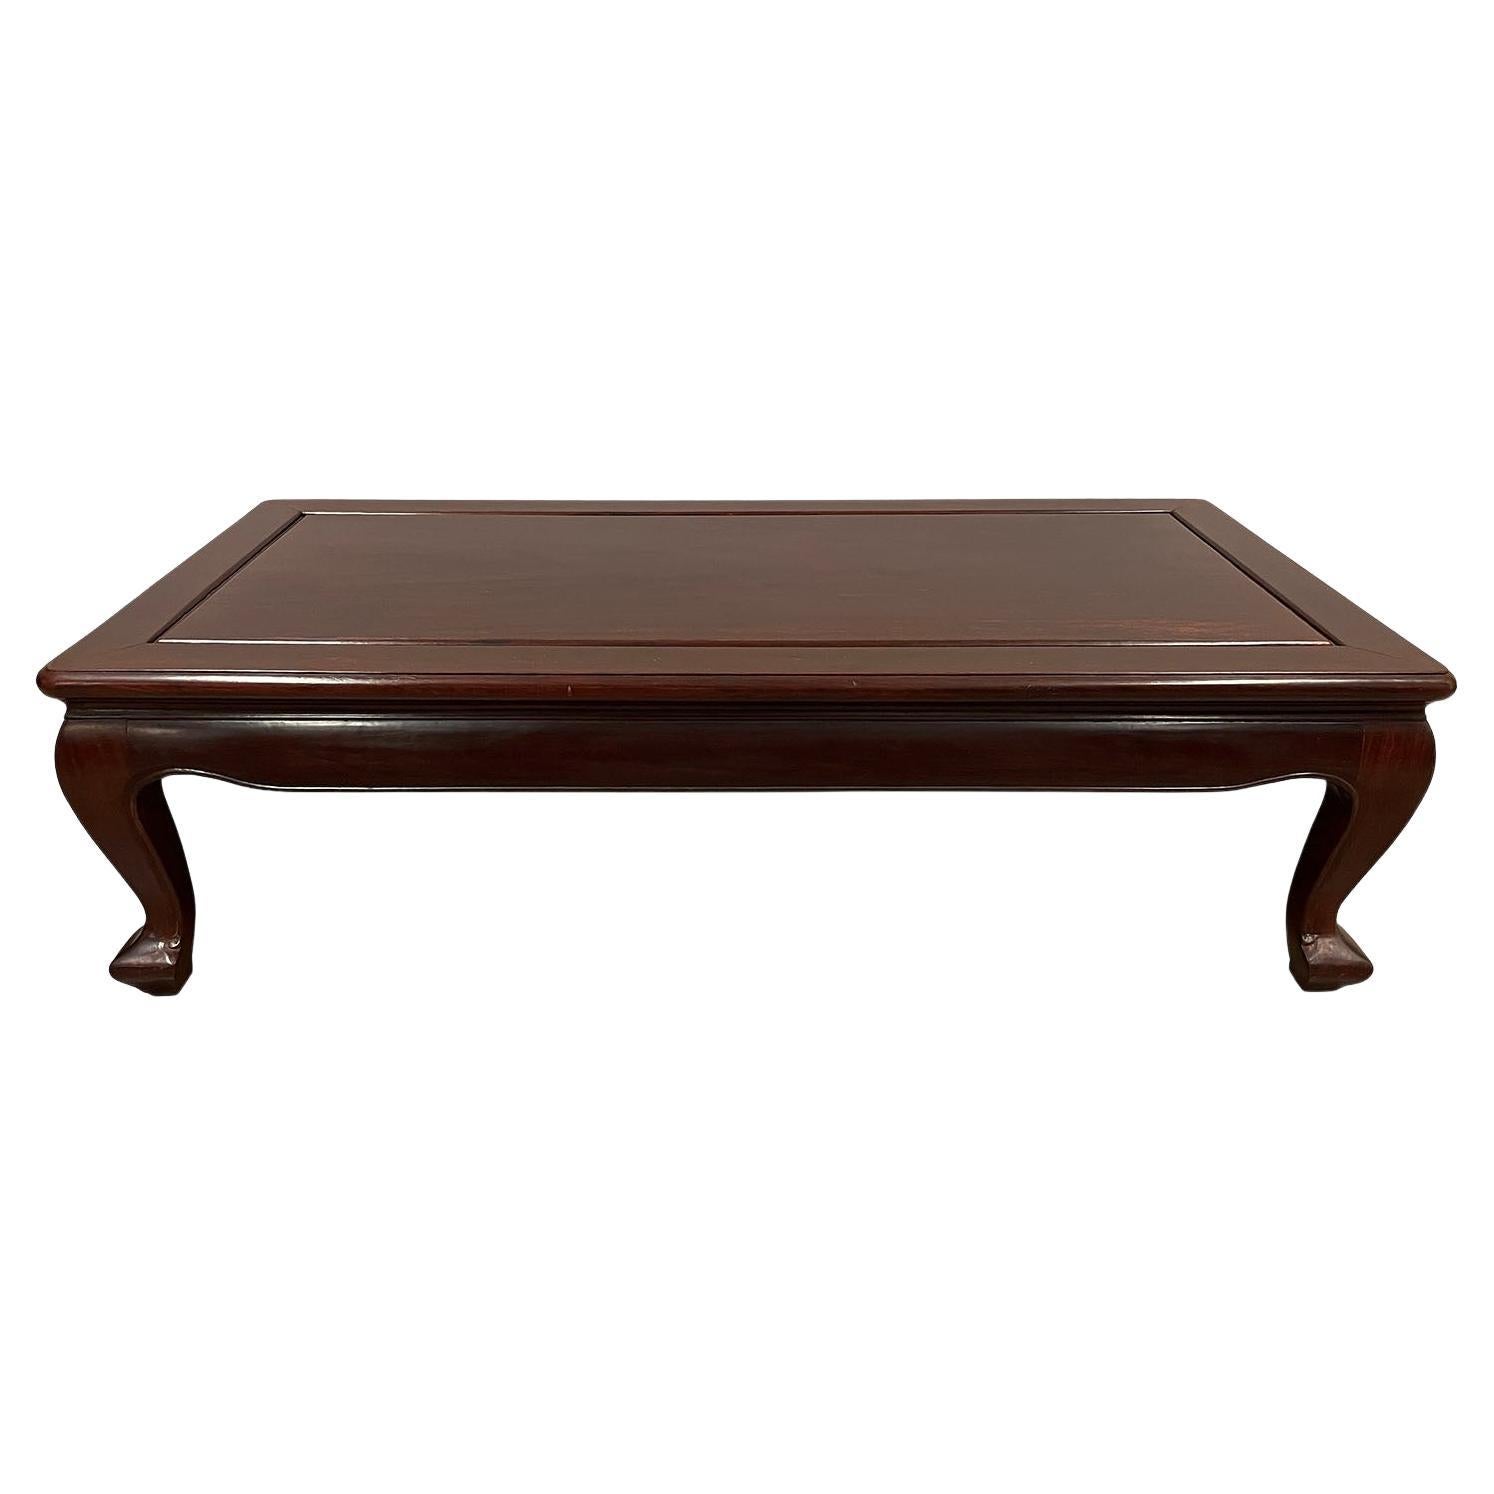 Vintage Chinese Rosewood Carved Coffee Table